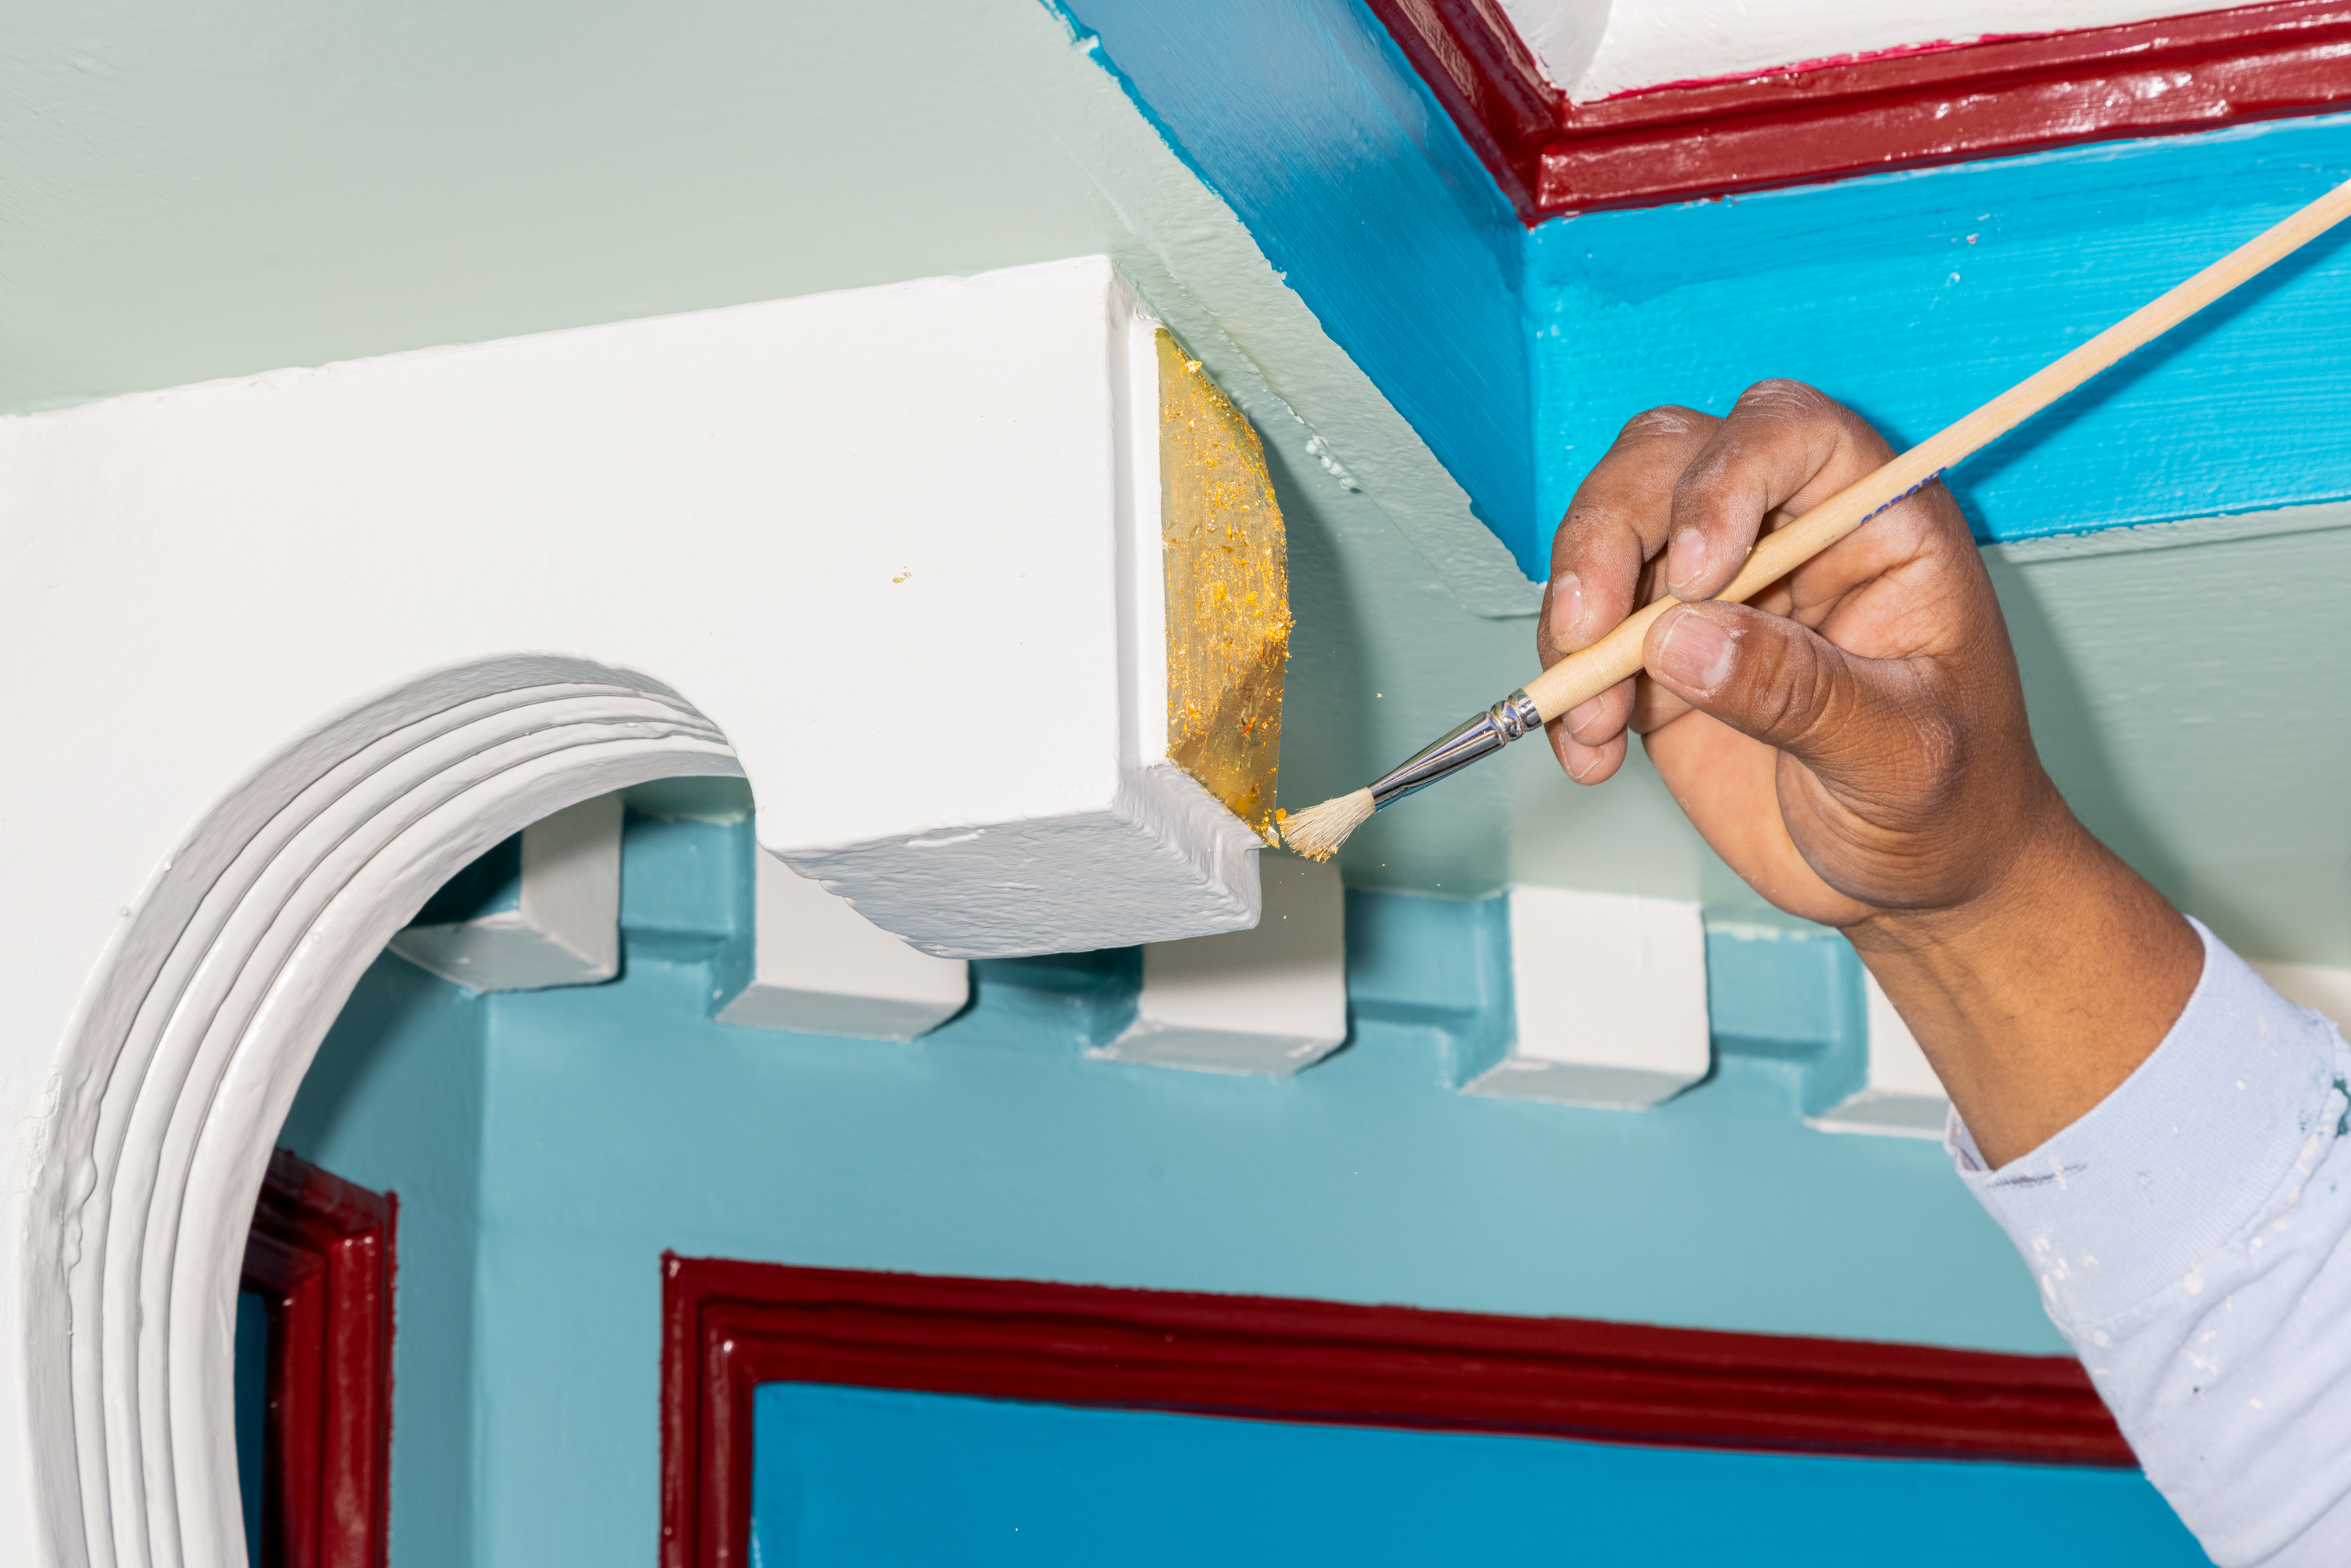 A hand is painting the edge of vibrant, multicolored architectural features.